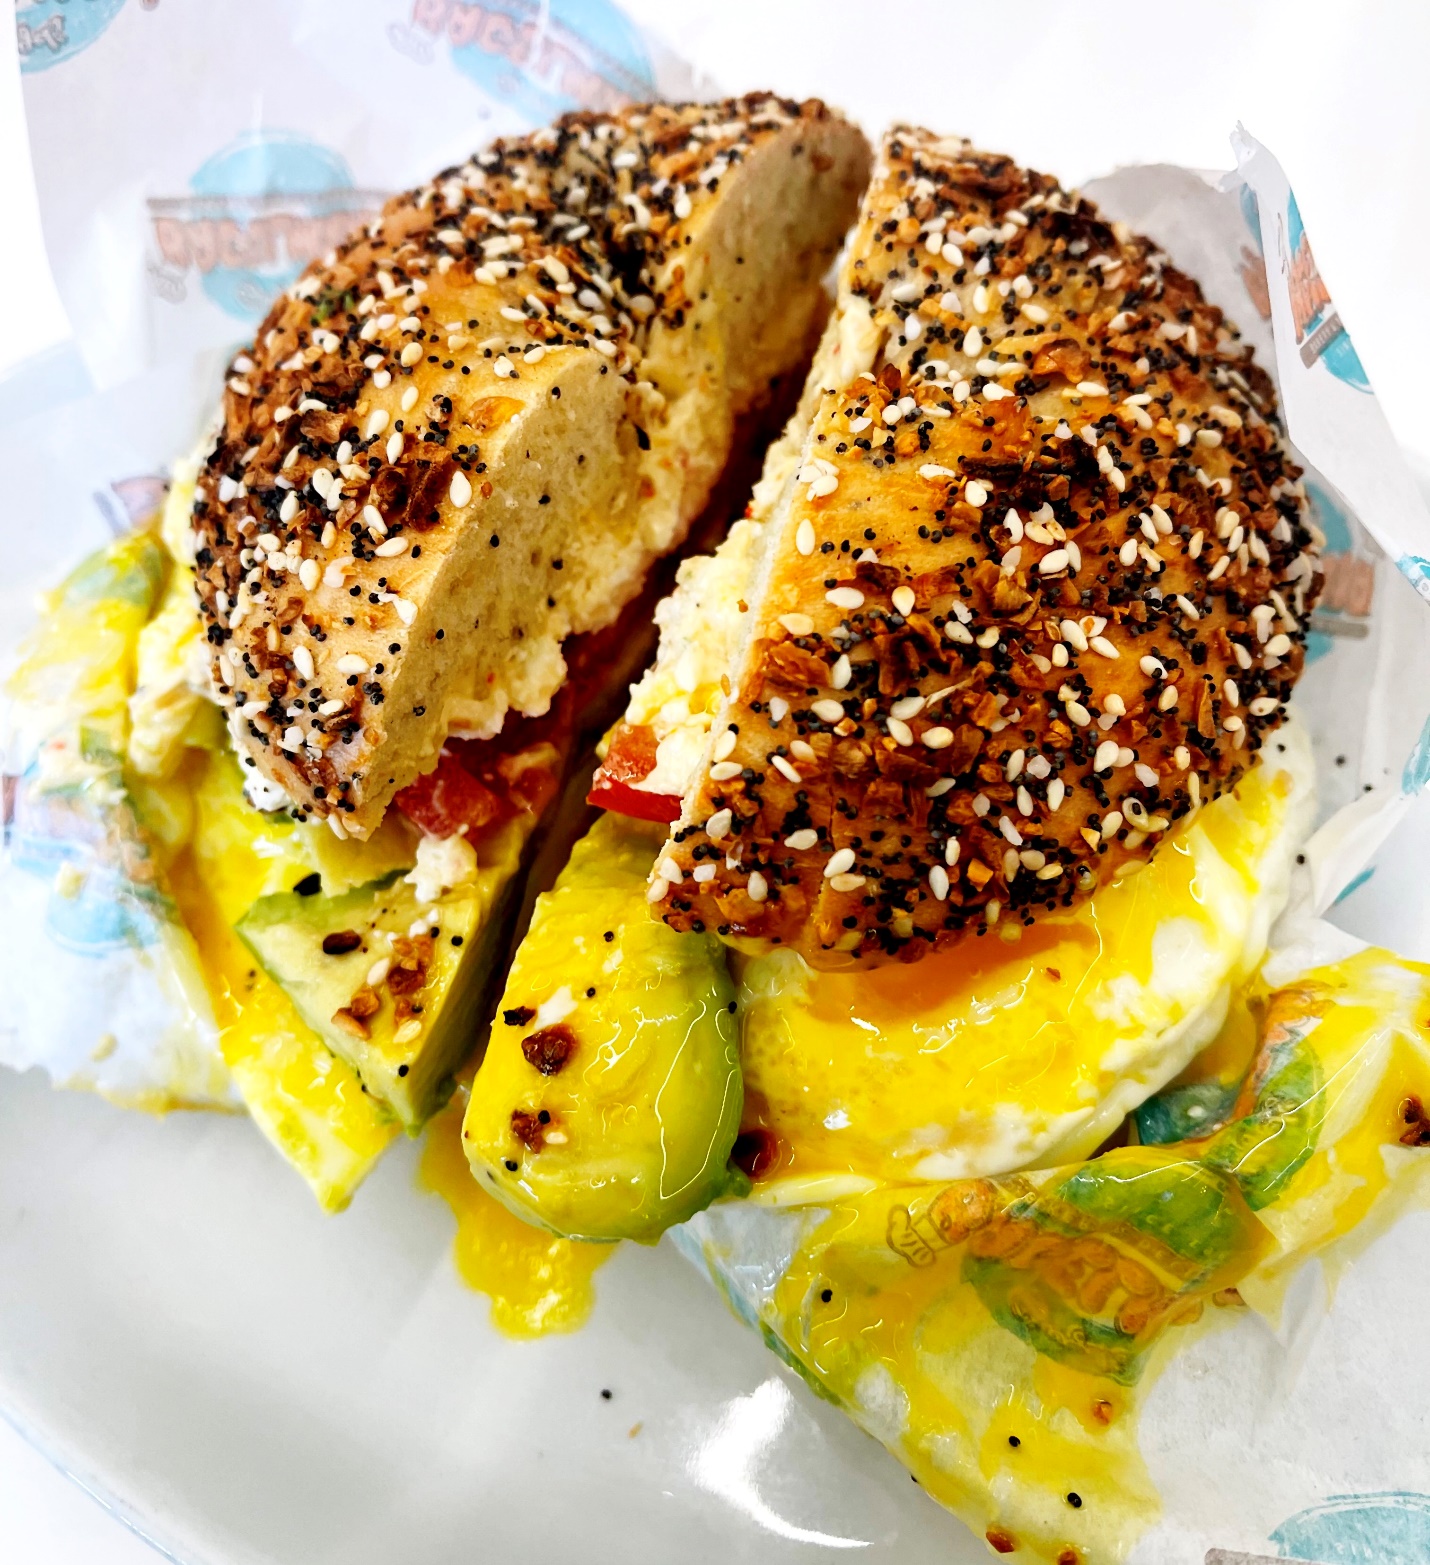 A bagel sandwich with eggs and avocado Description automatically generated with medium confidence